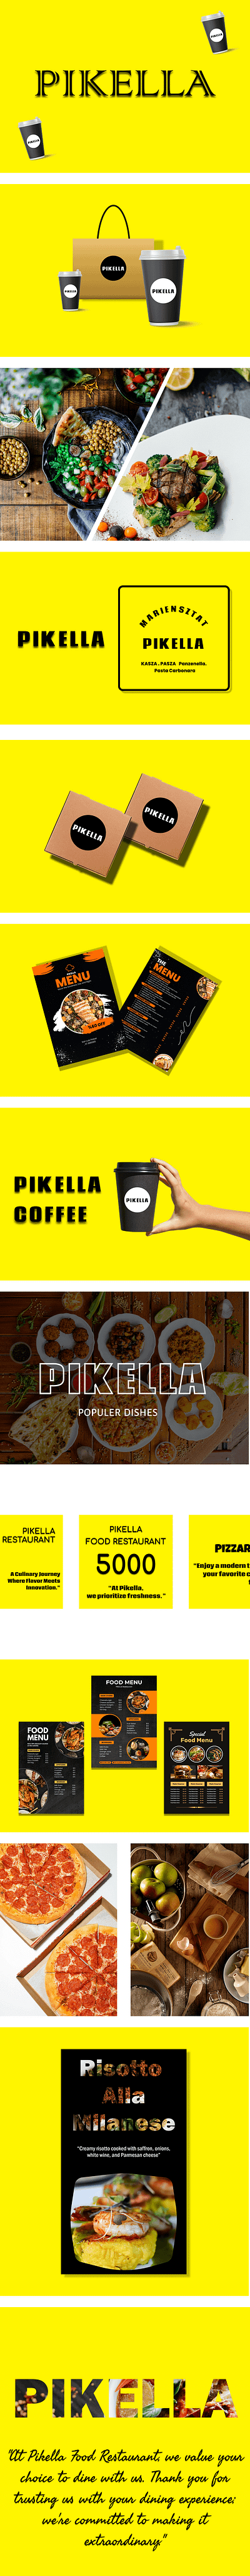 PIKELLA - Kpyxal Solutions LLP 3d animation branding graphic design logo motion graphics ui